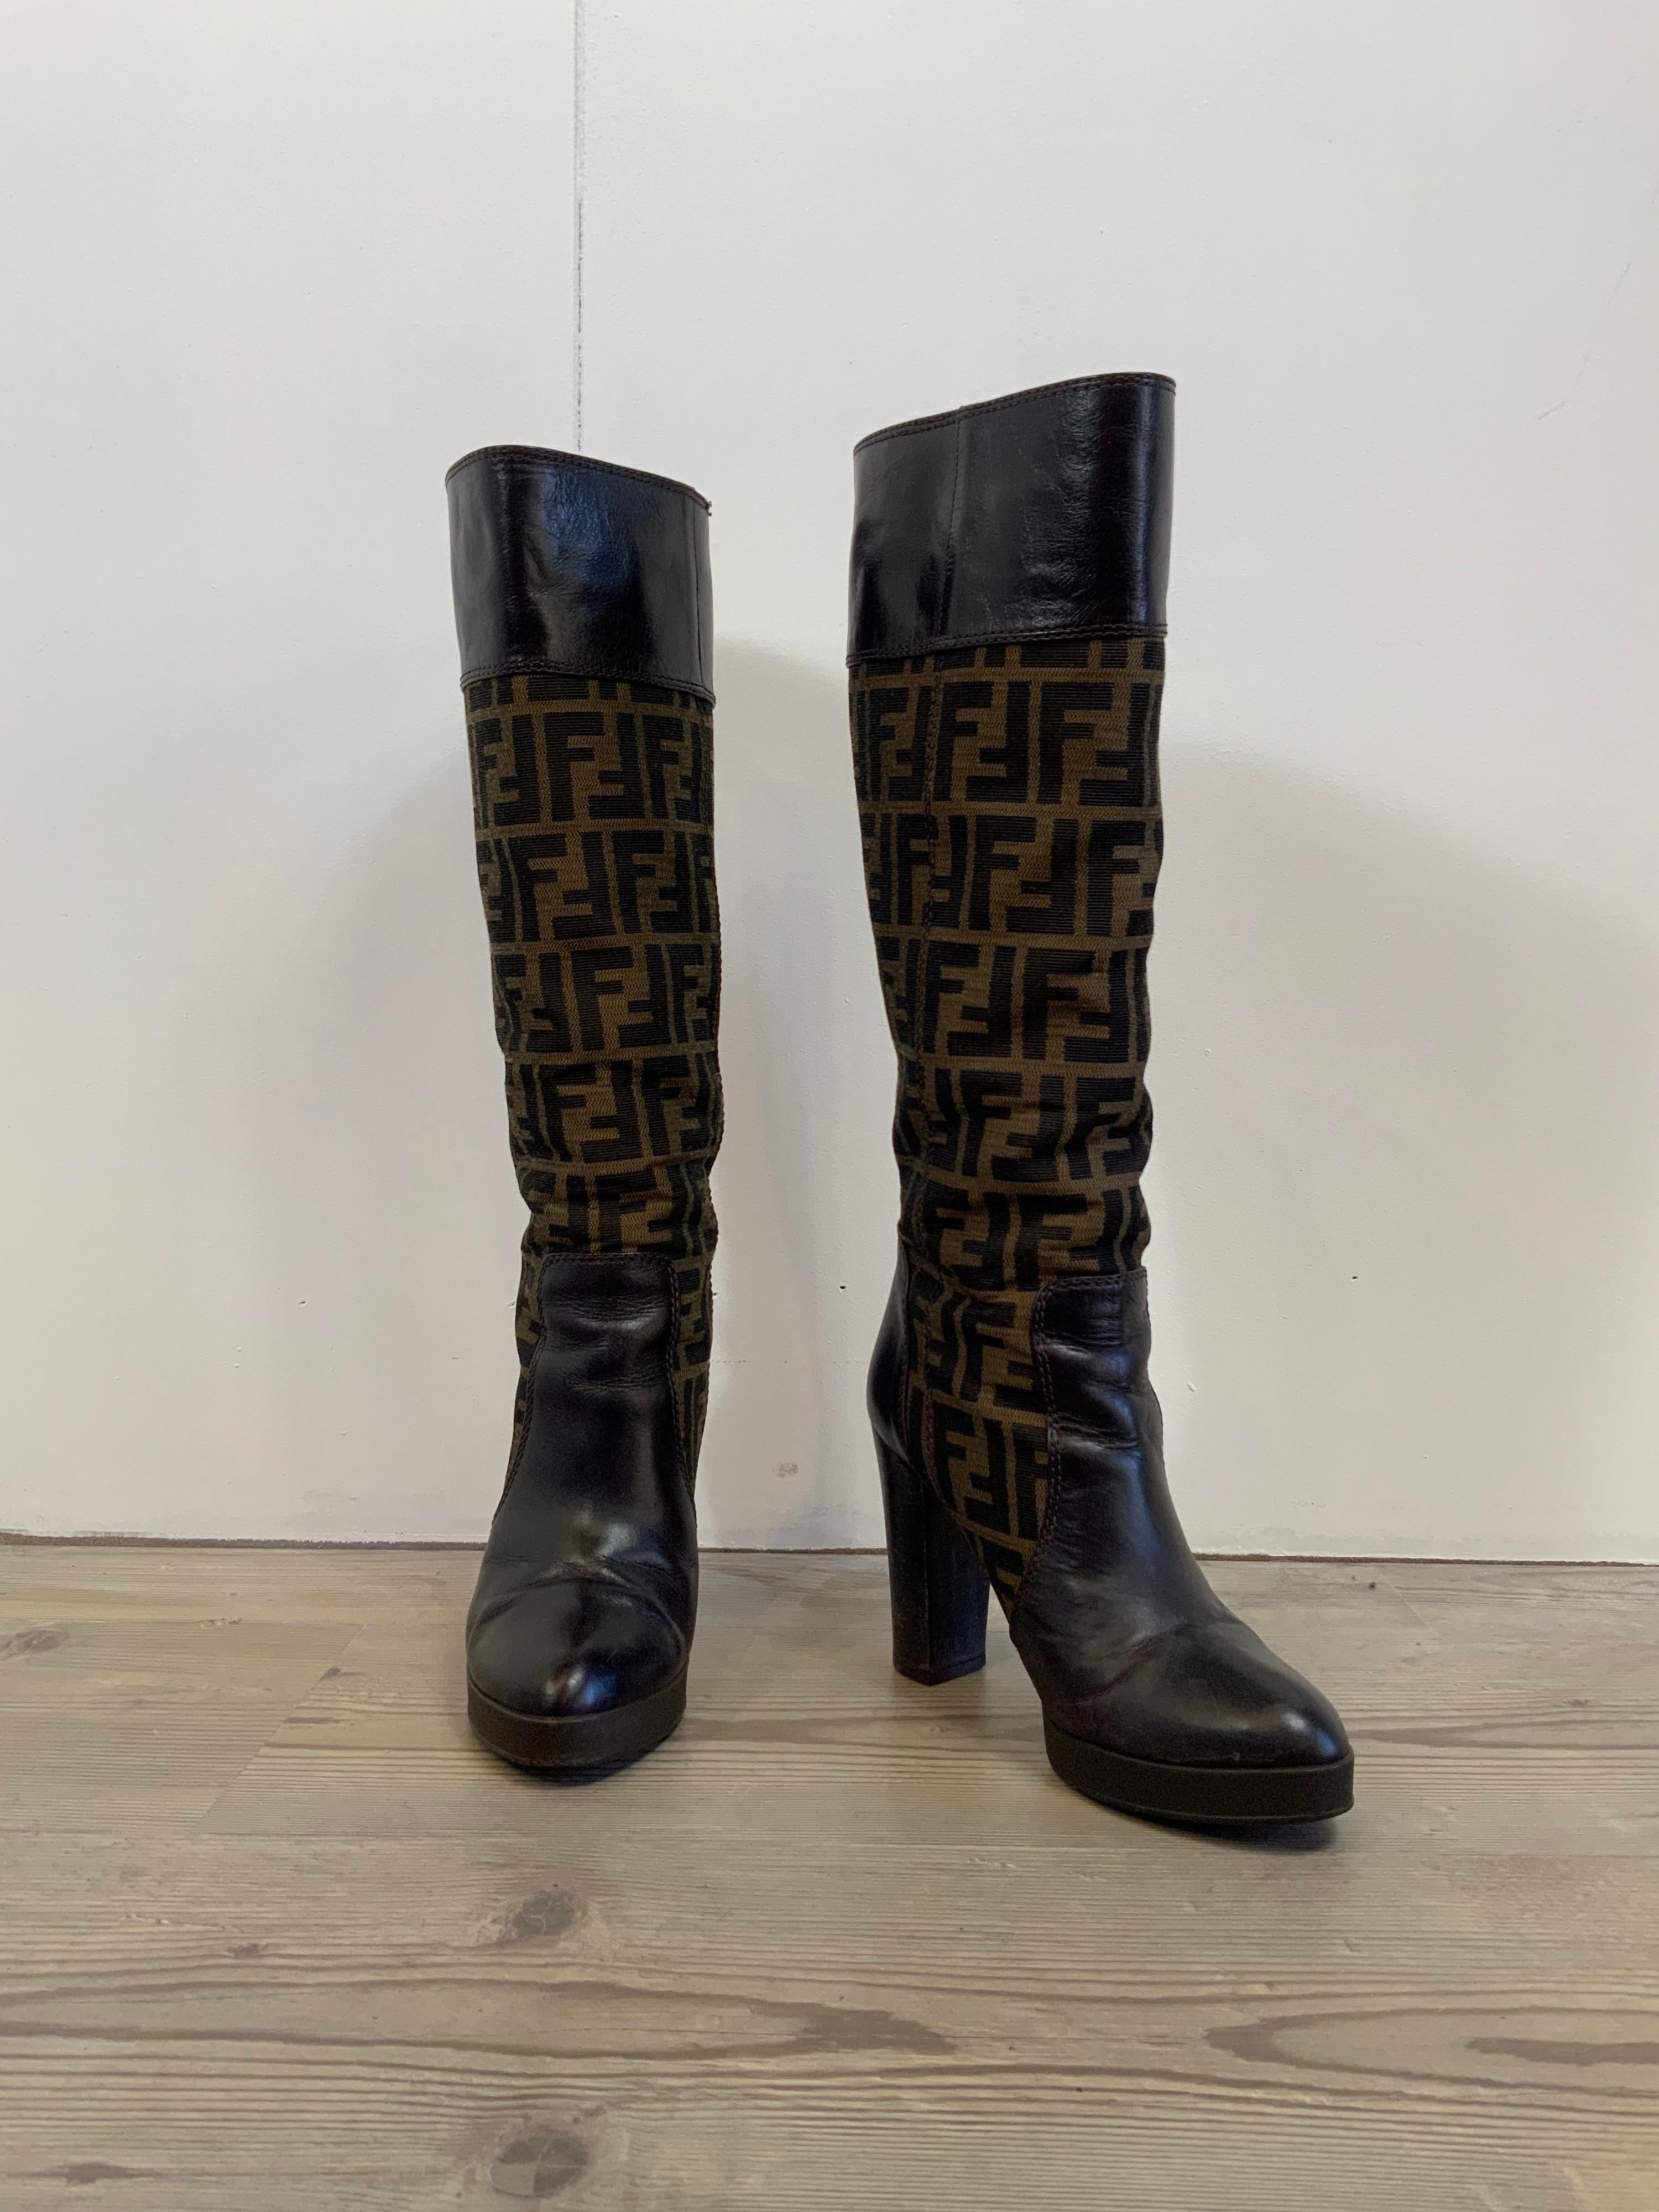 Fendi Boots.
Classic all over monogram zucca fabric plus leather details.
Size 36,5 Italian.
Heels: 9,5 cm
Plateau: 2 cm
Total Length: 45 cm
They comes with original box.
Conditions: Good- Previously owned and gently worn, with little signs of use.